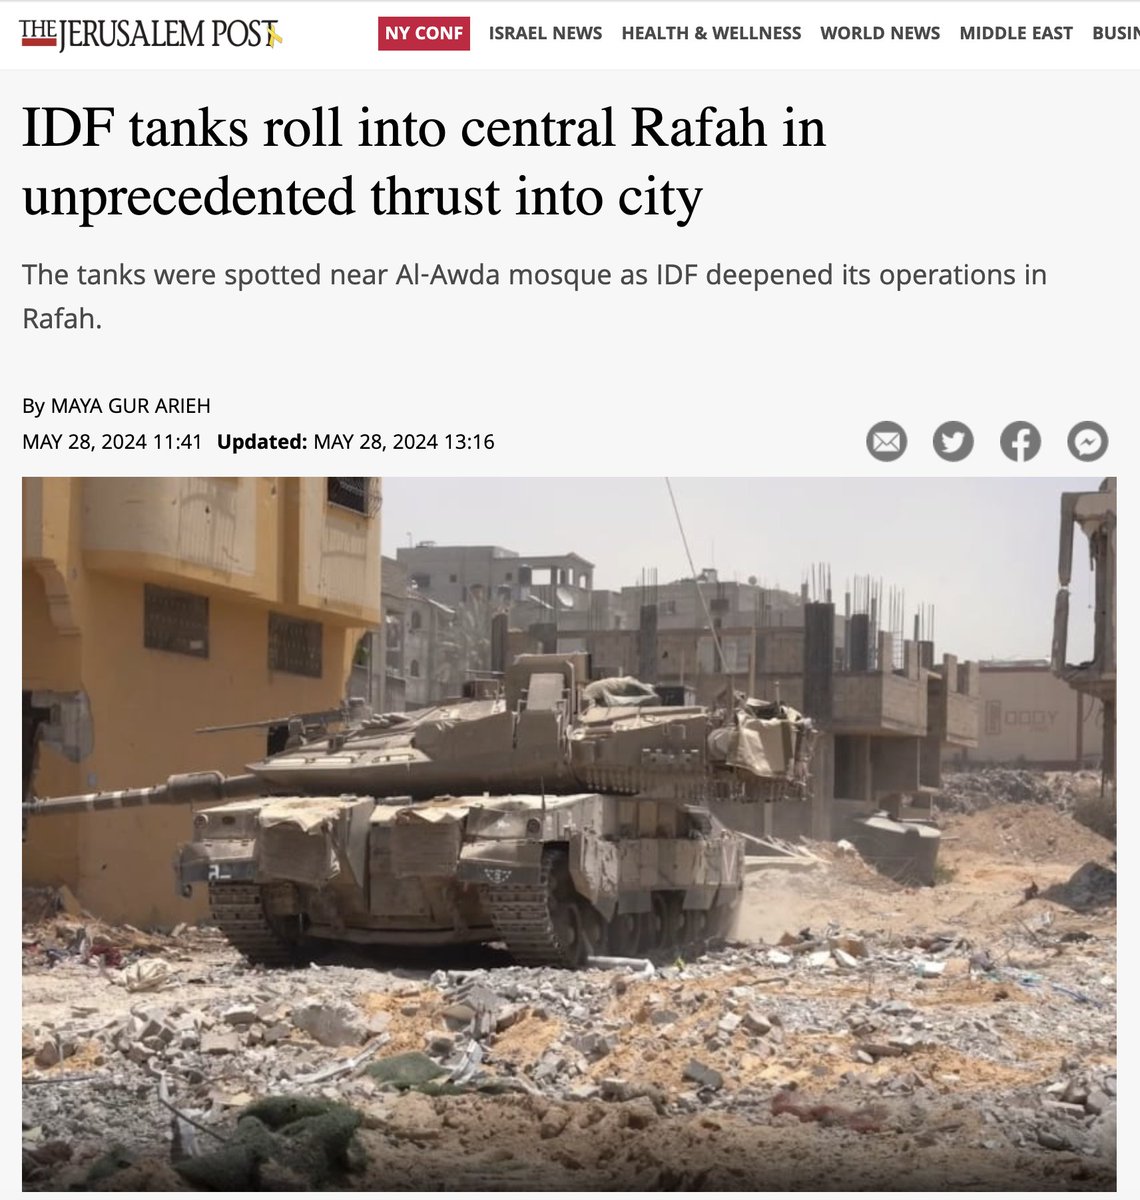 The Biden administration via @StateDeptSpox: 'With respect to reports of tanks in central Rafah today, it's not something we can see or have been able to verify at this point.' Israeli media: